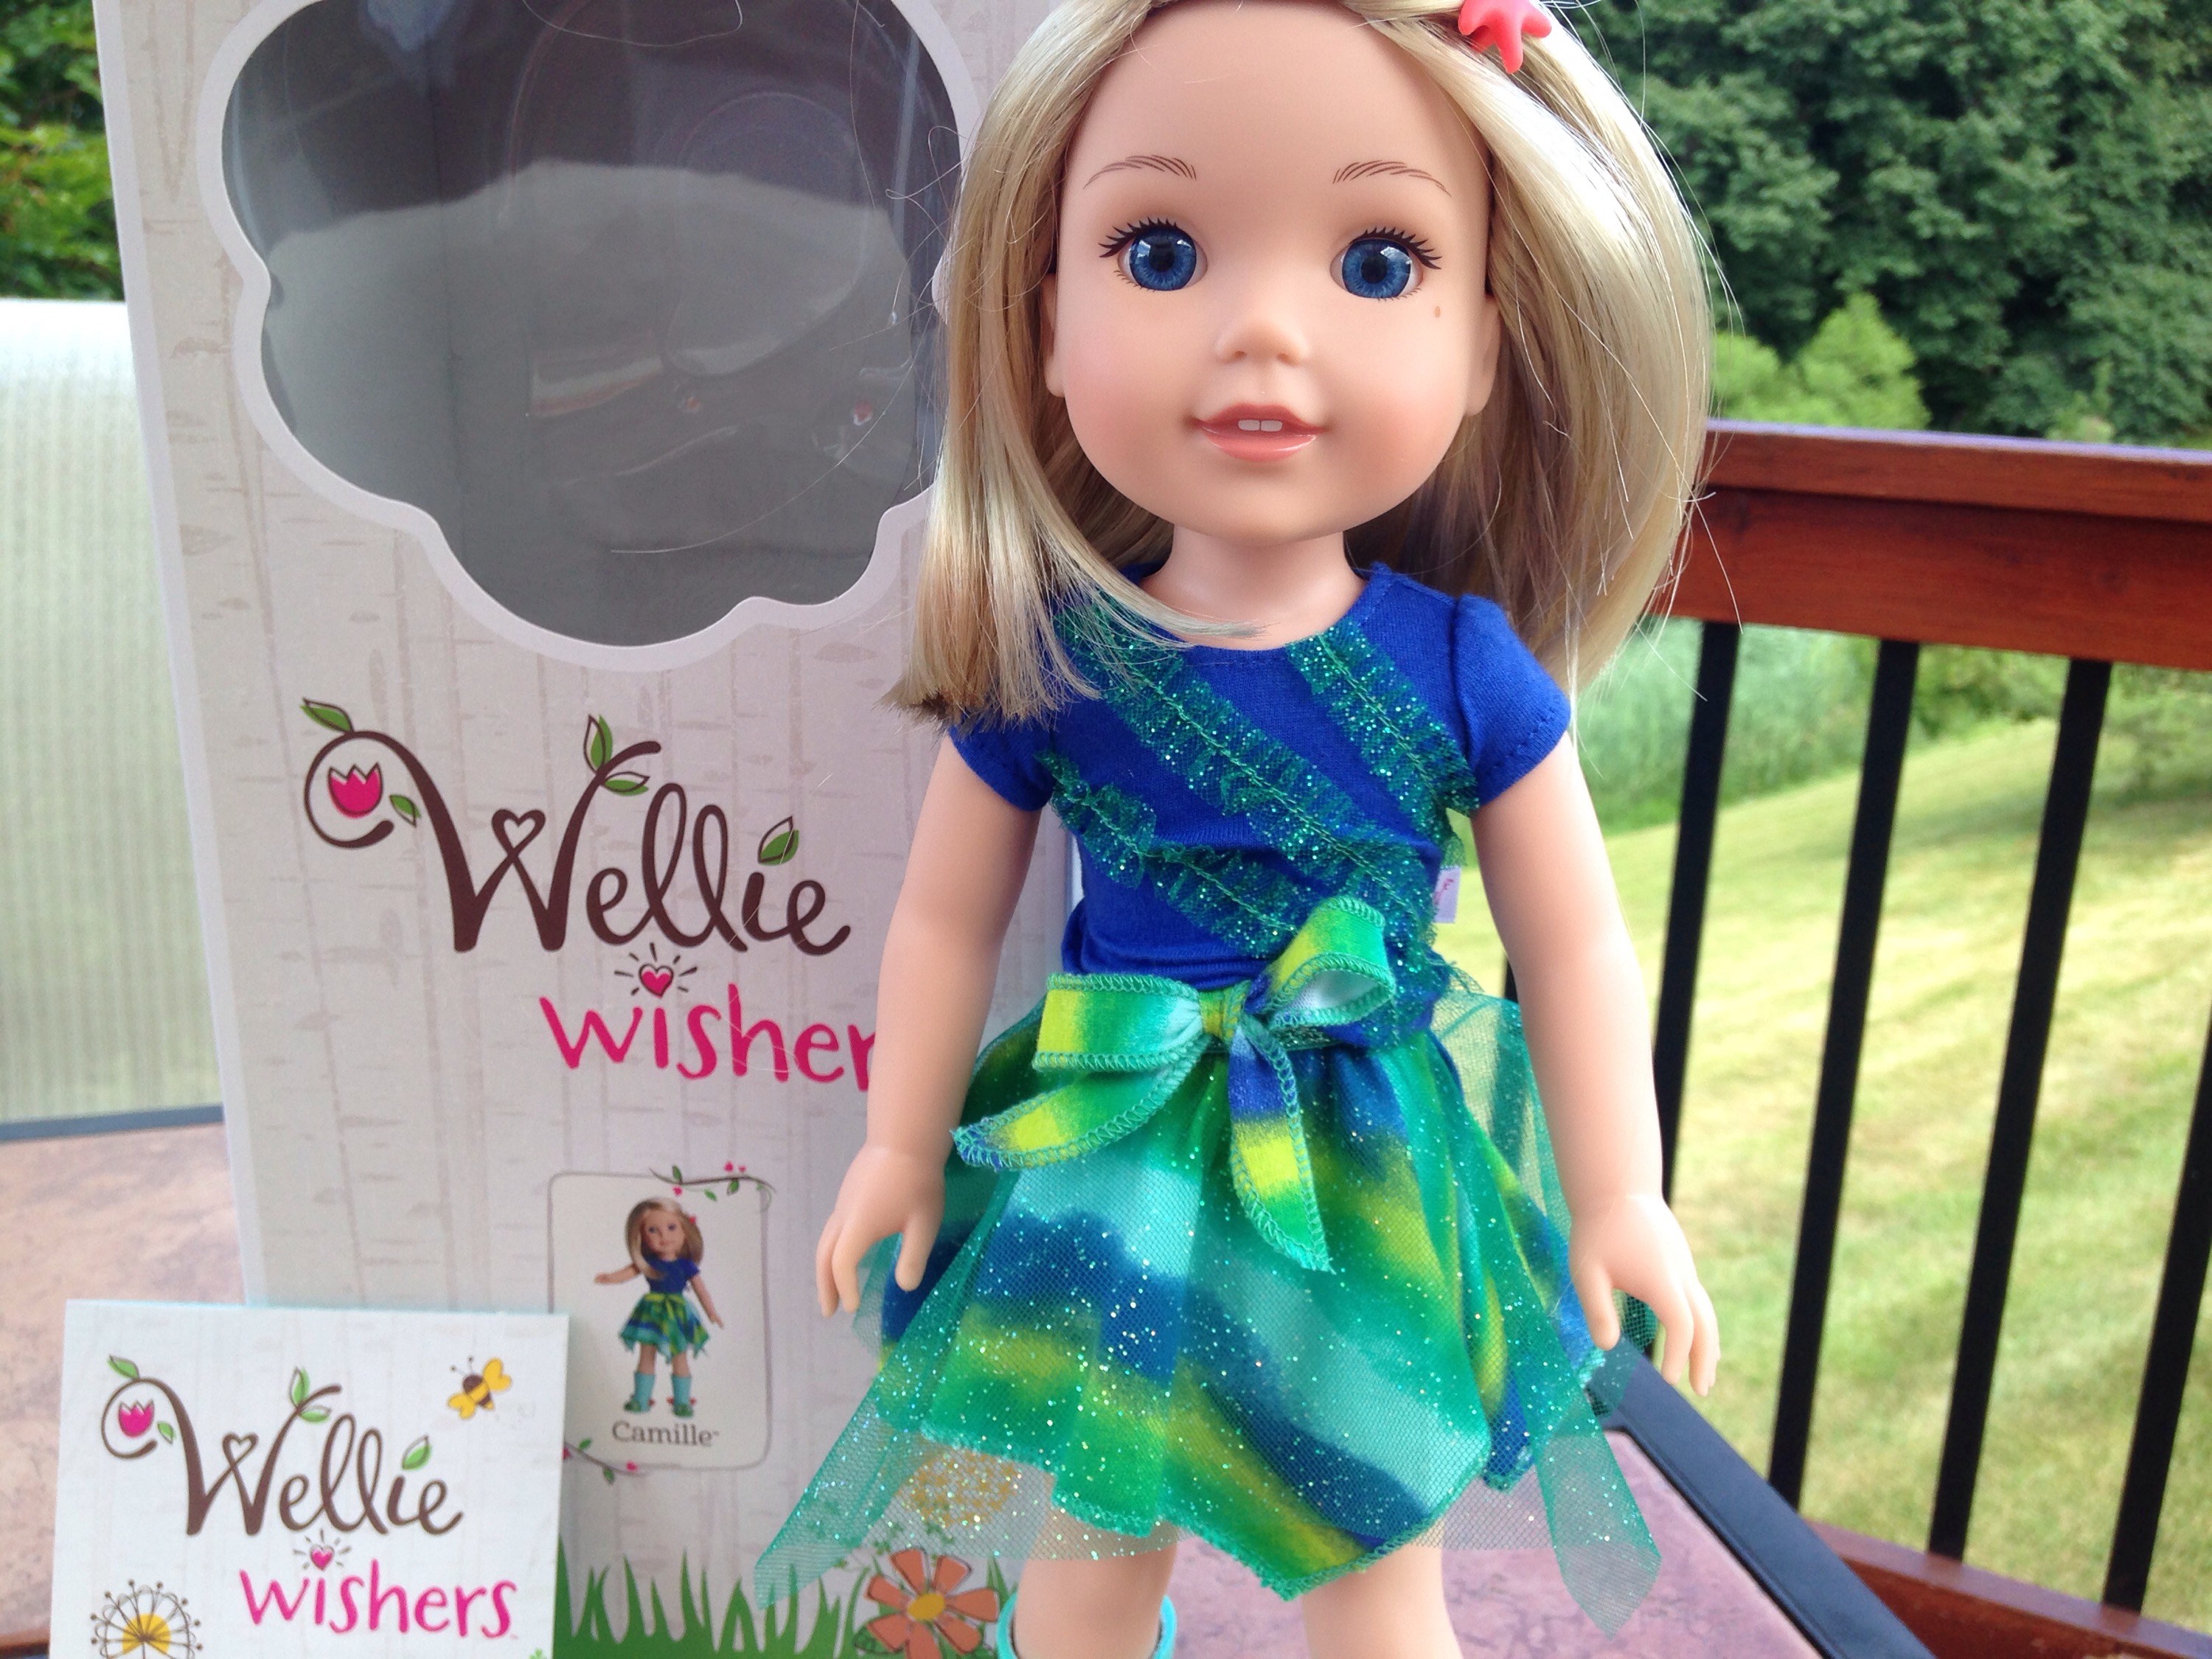 American Girl Wellie Wishers Doll Video Review and Giveaway